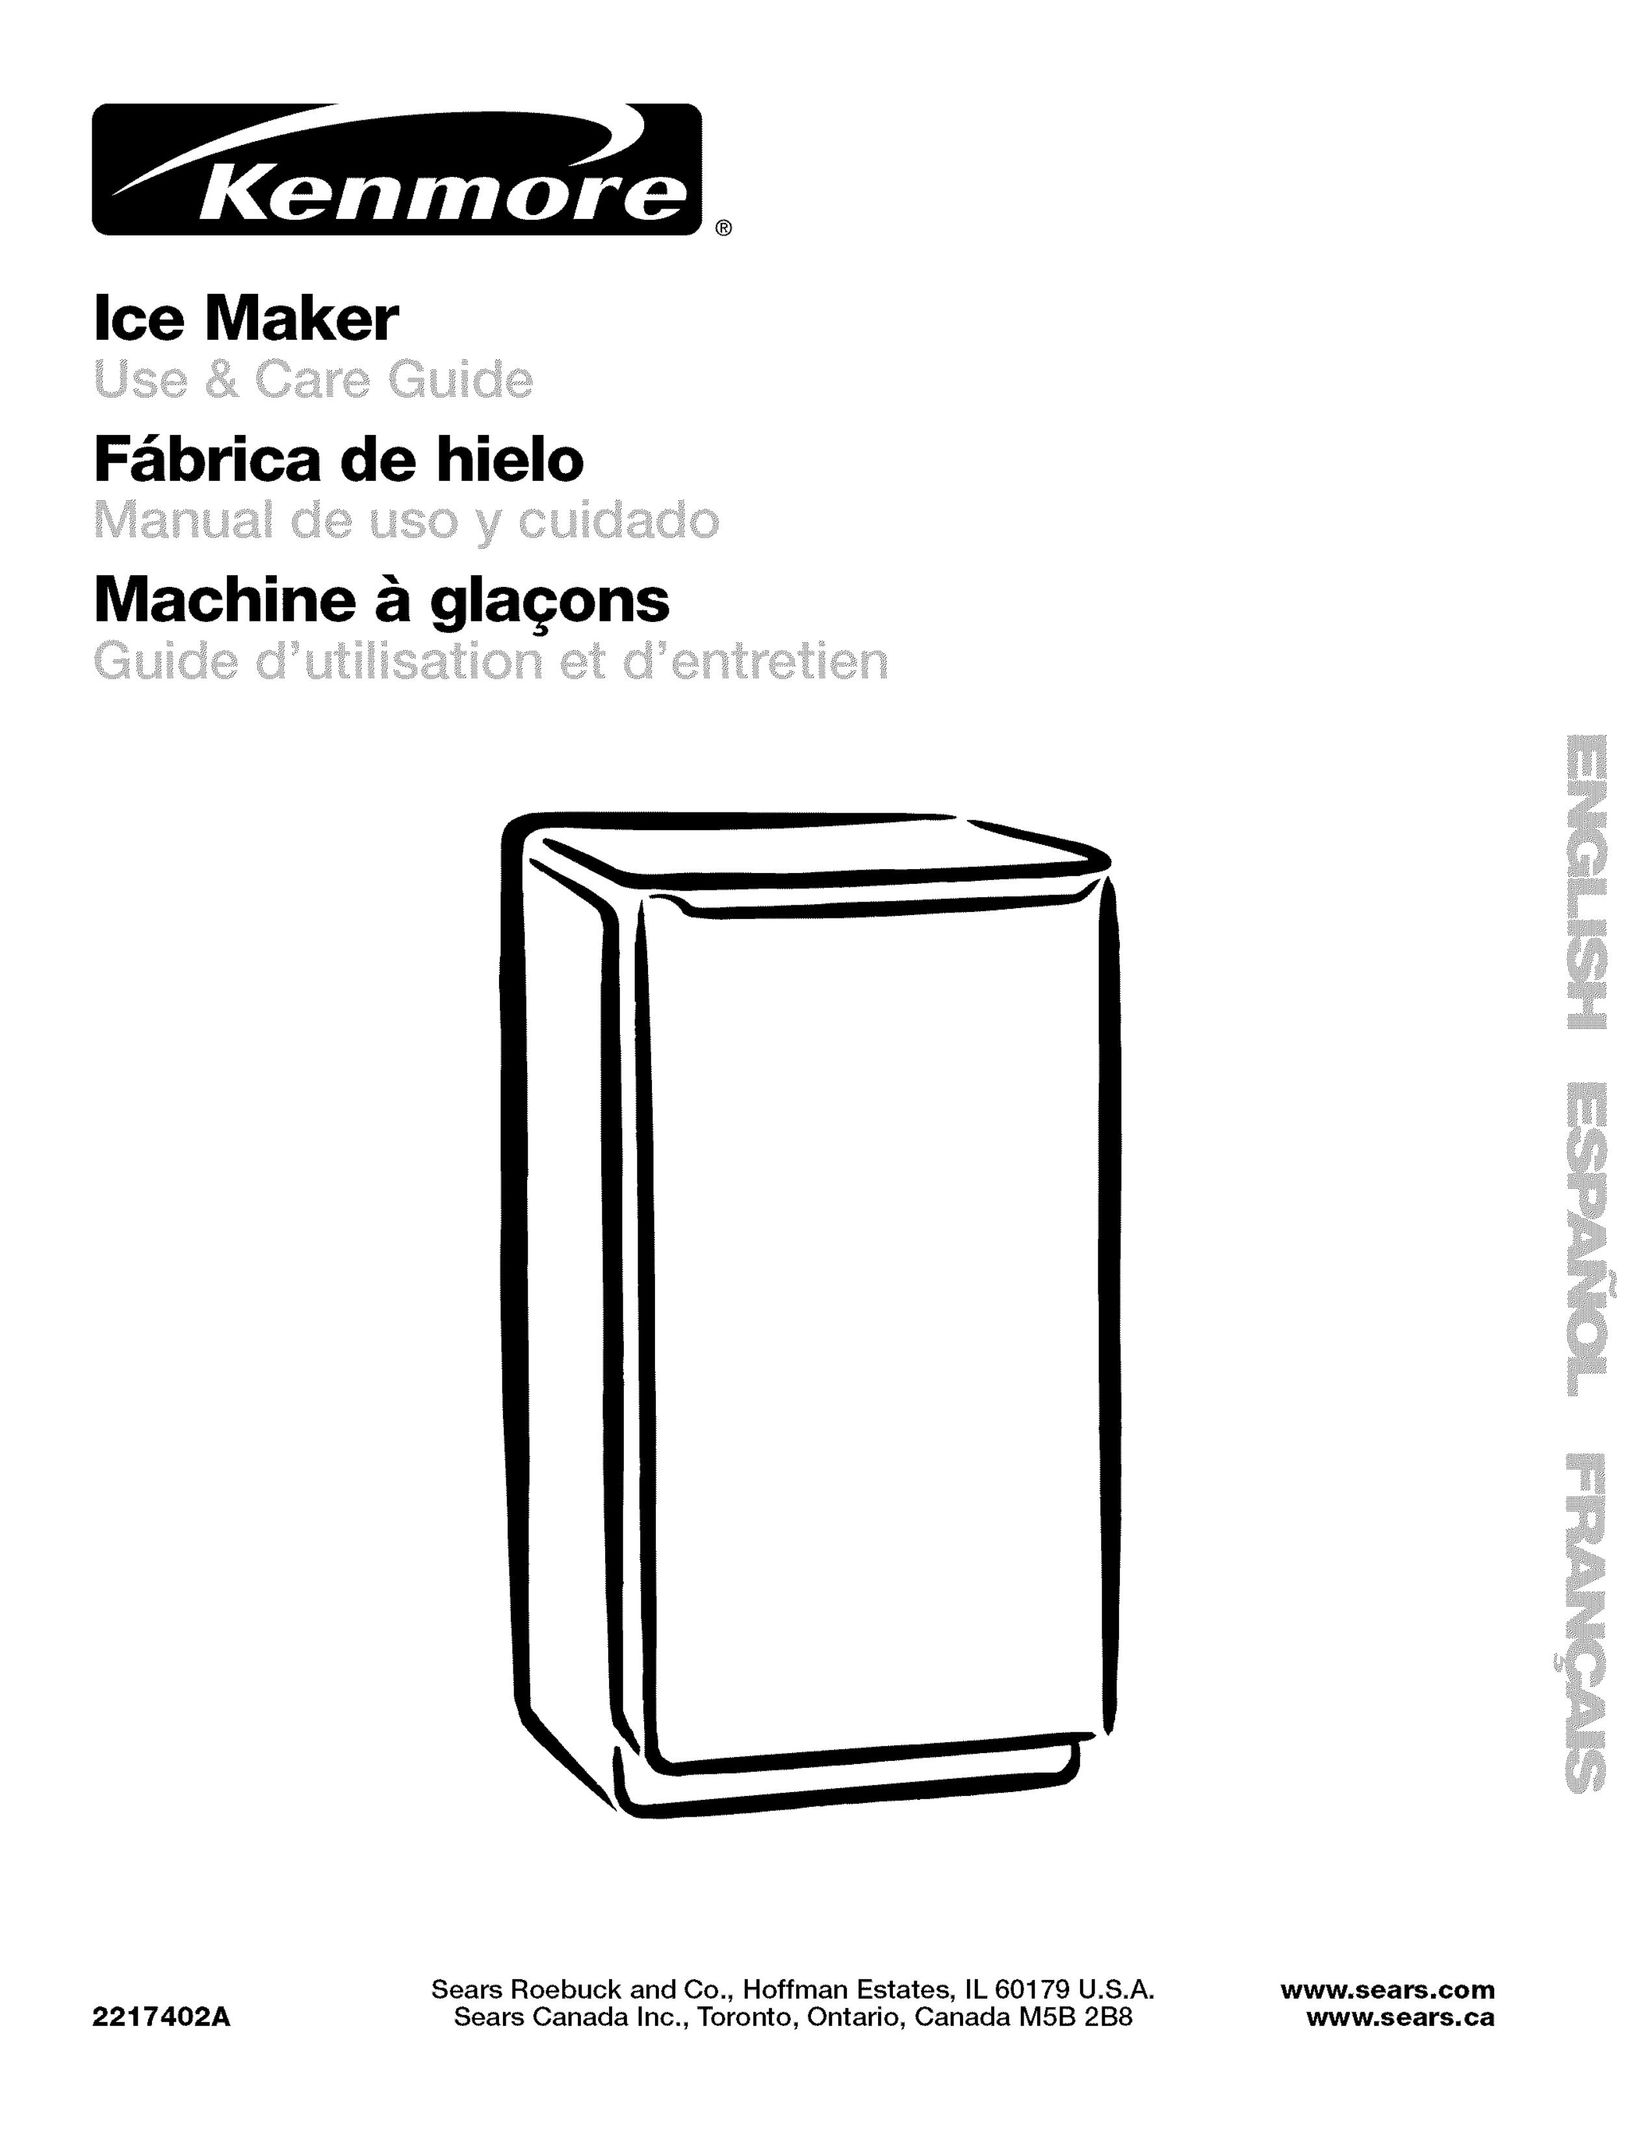 Kenmore 2217402A Ice Maker User Manual